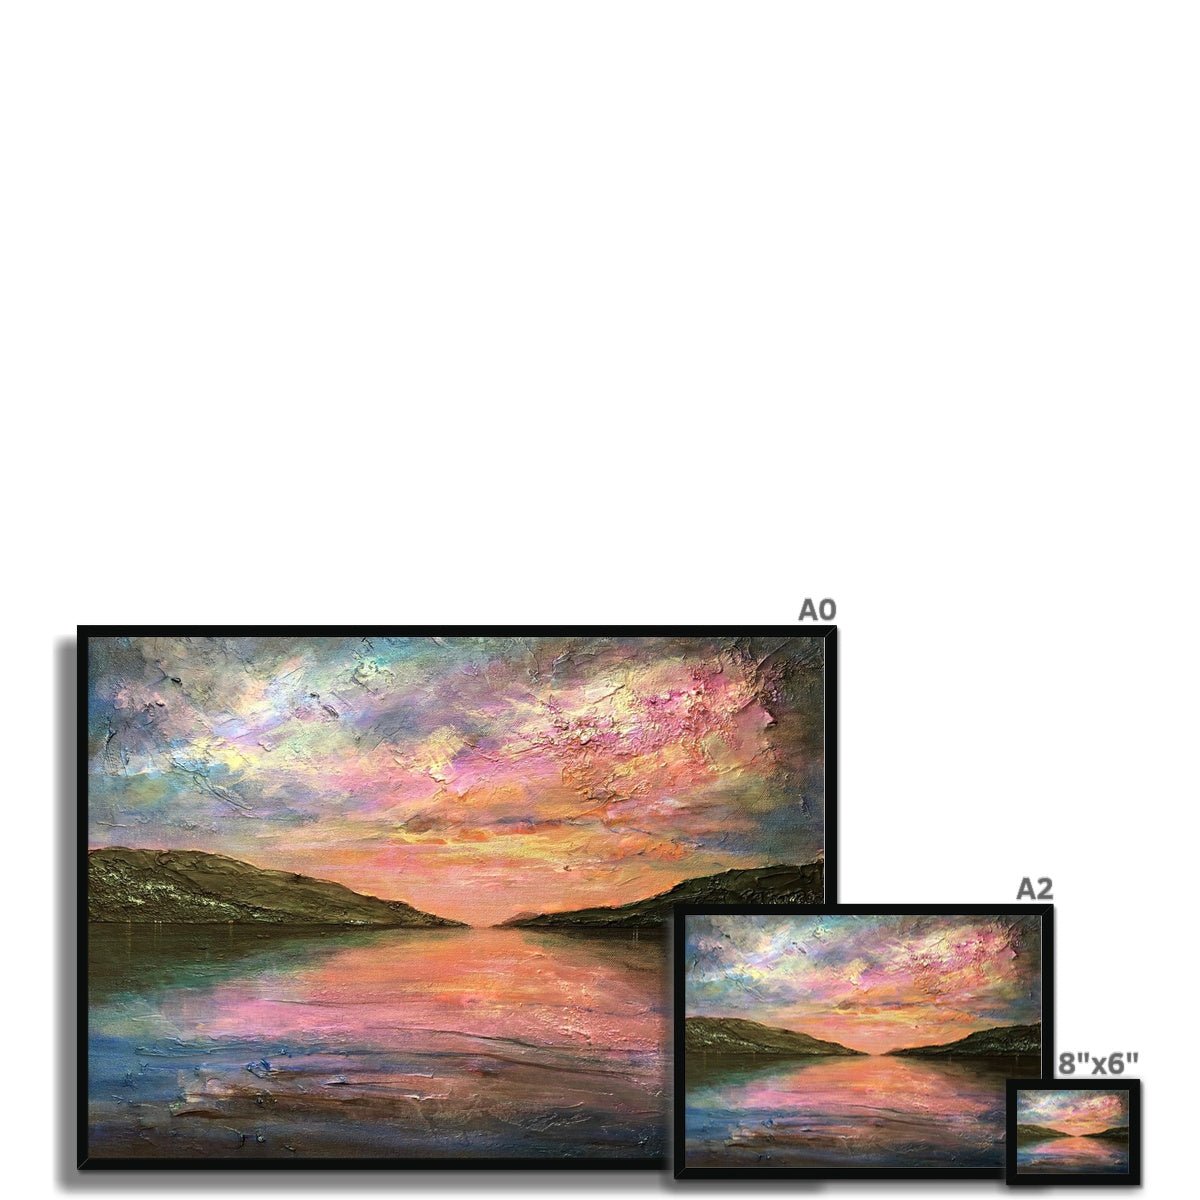 Loch Ness Dawn Painting | Framed Prints From Scotland-Framed Prints-Scottish Lochs & Mountains Art Gallery-Paintings, Prints, Homeware, Art Gifts From Scotland By Scottish Artist Kevin Hunter